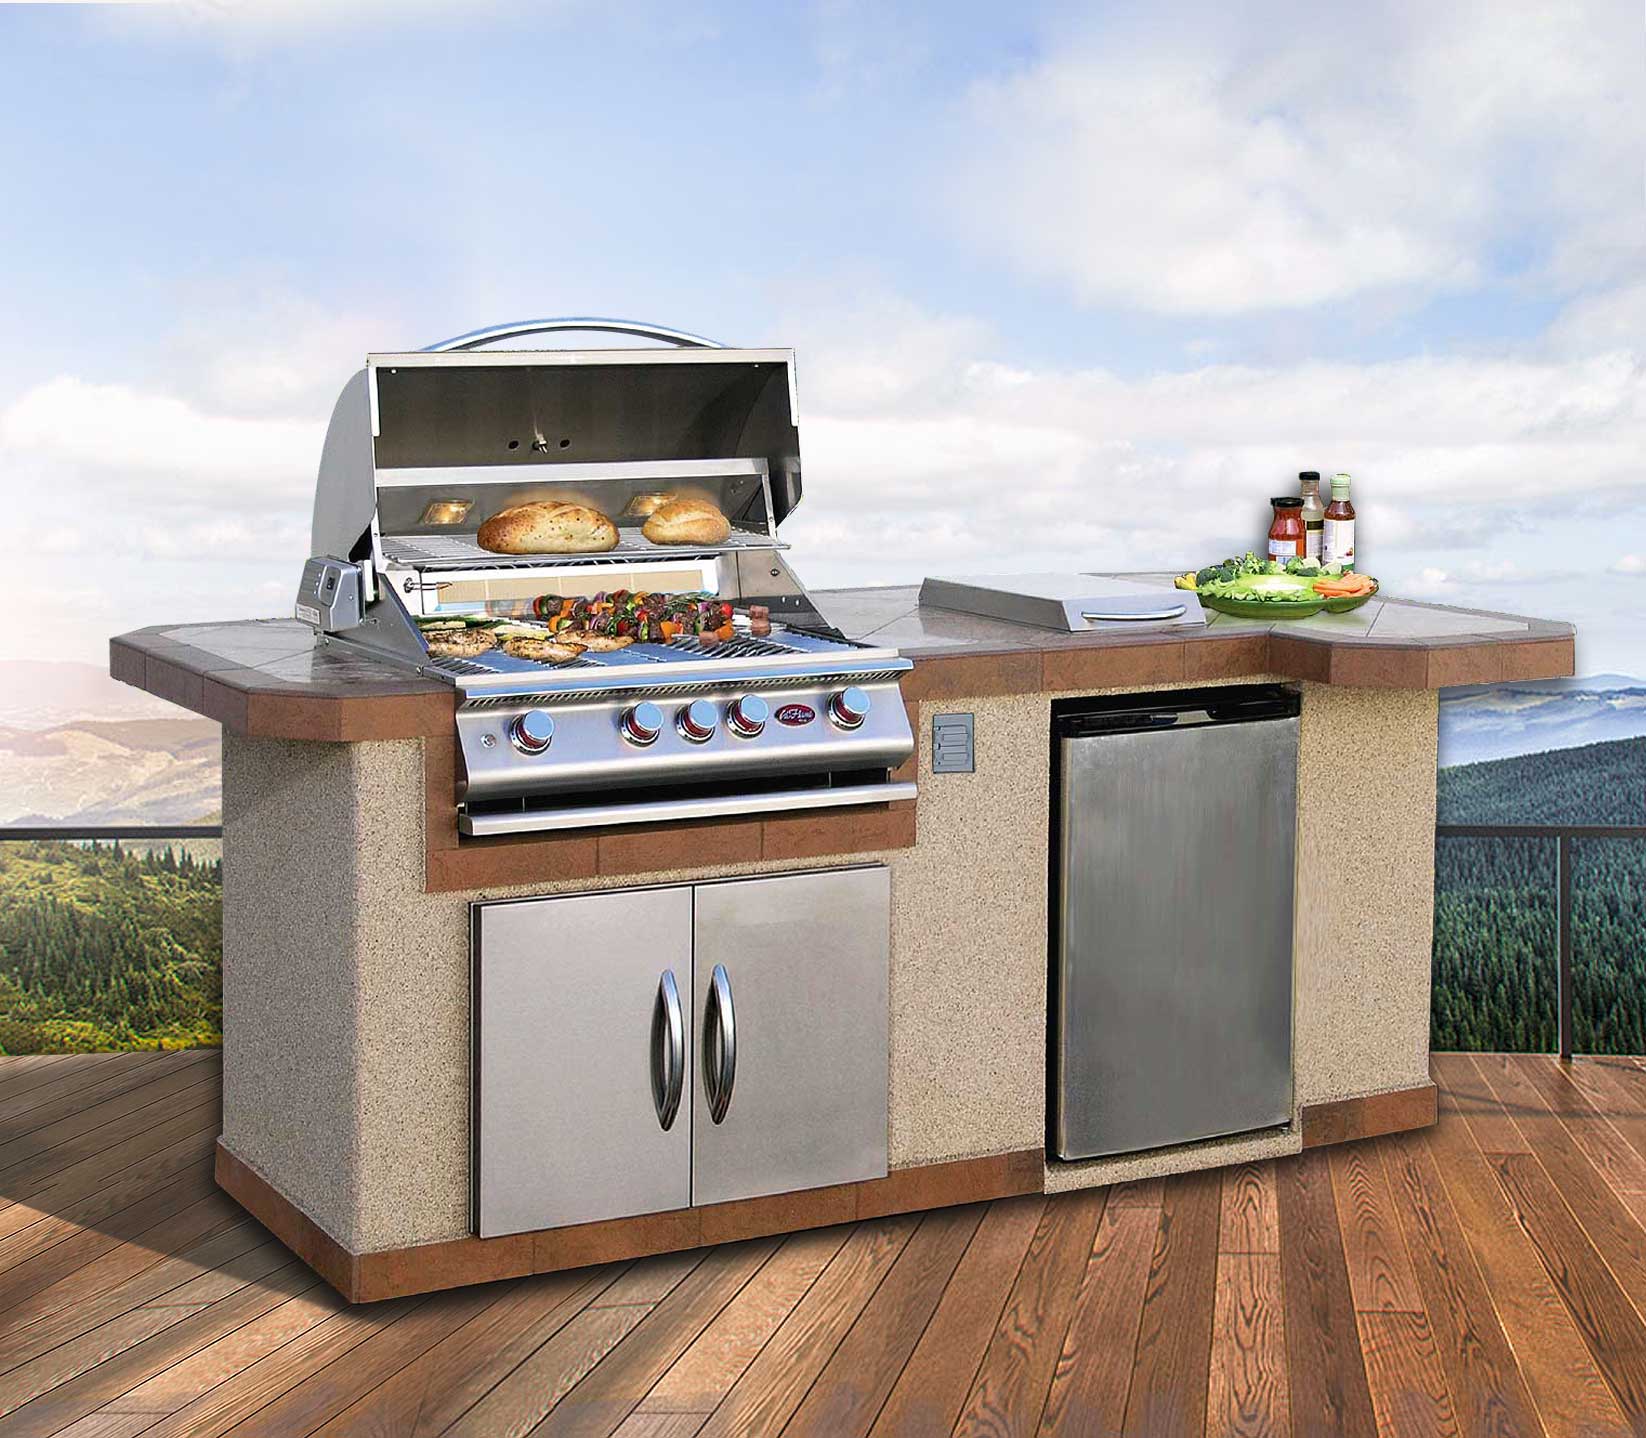 How to Build a Grilling Island